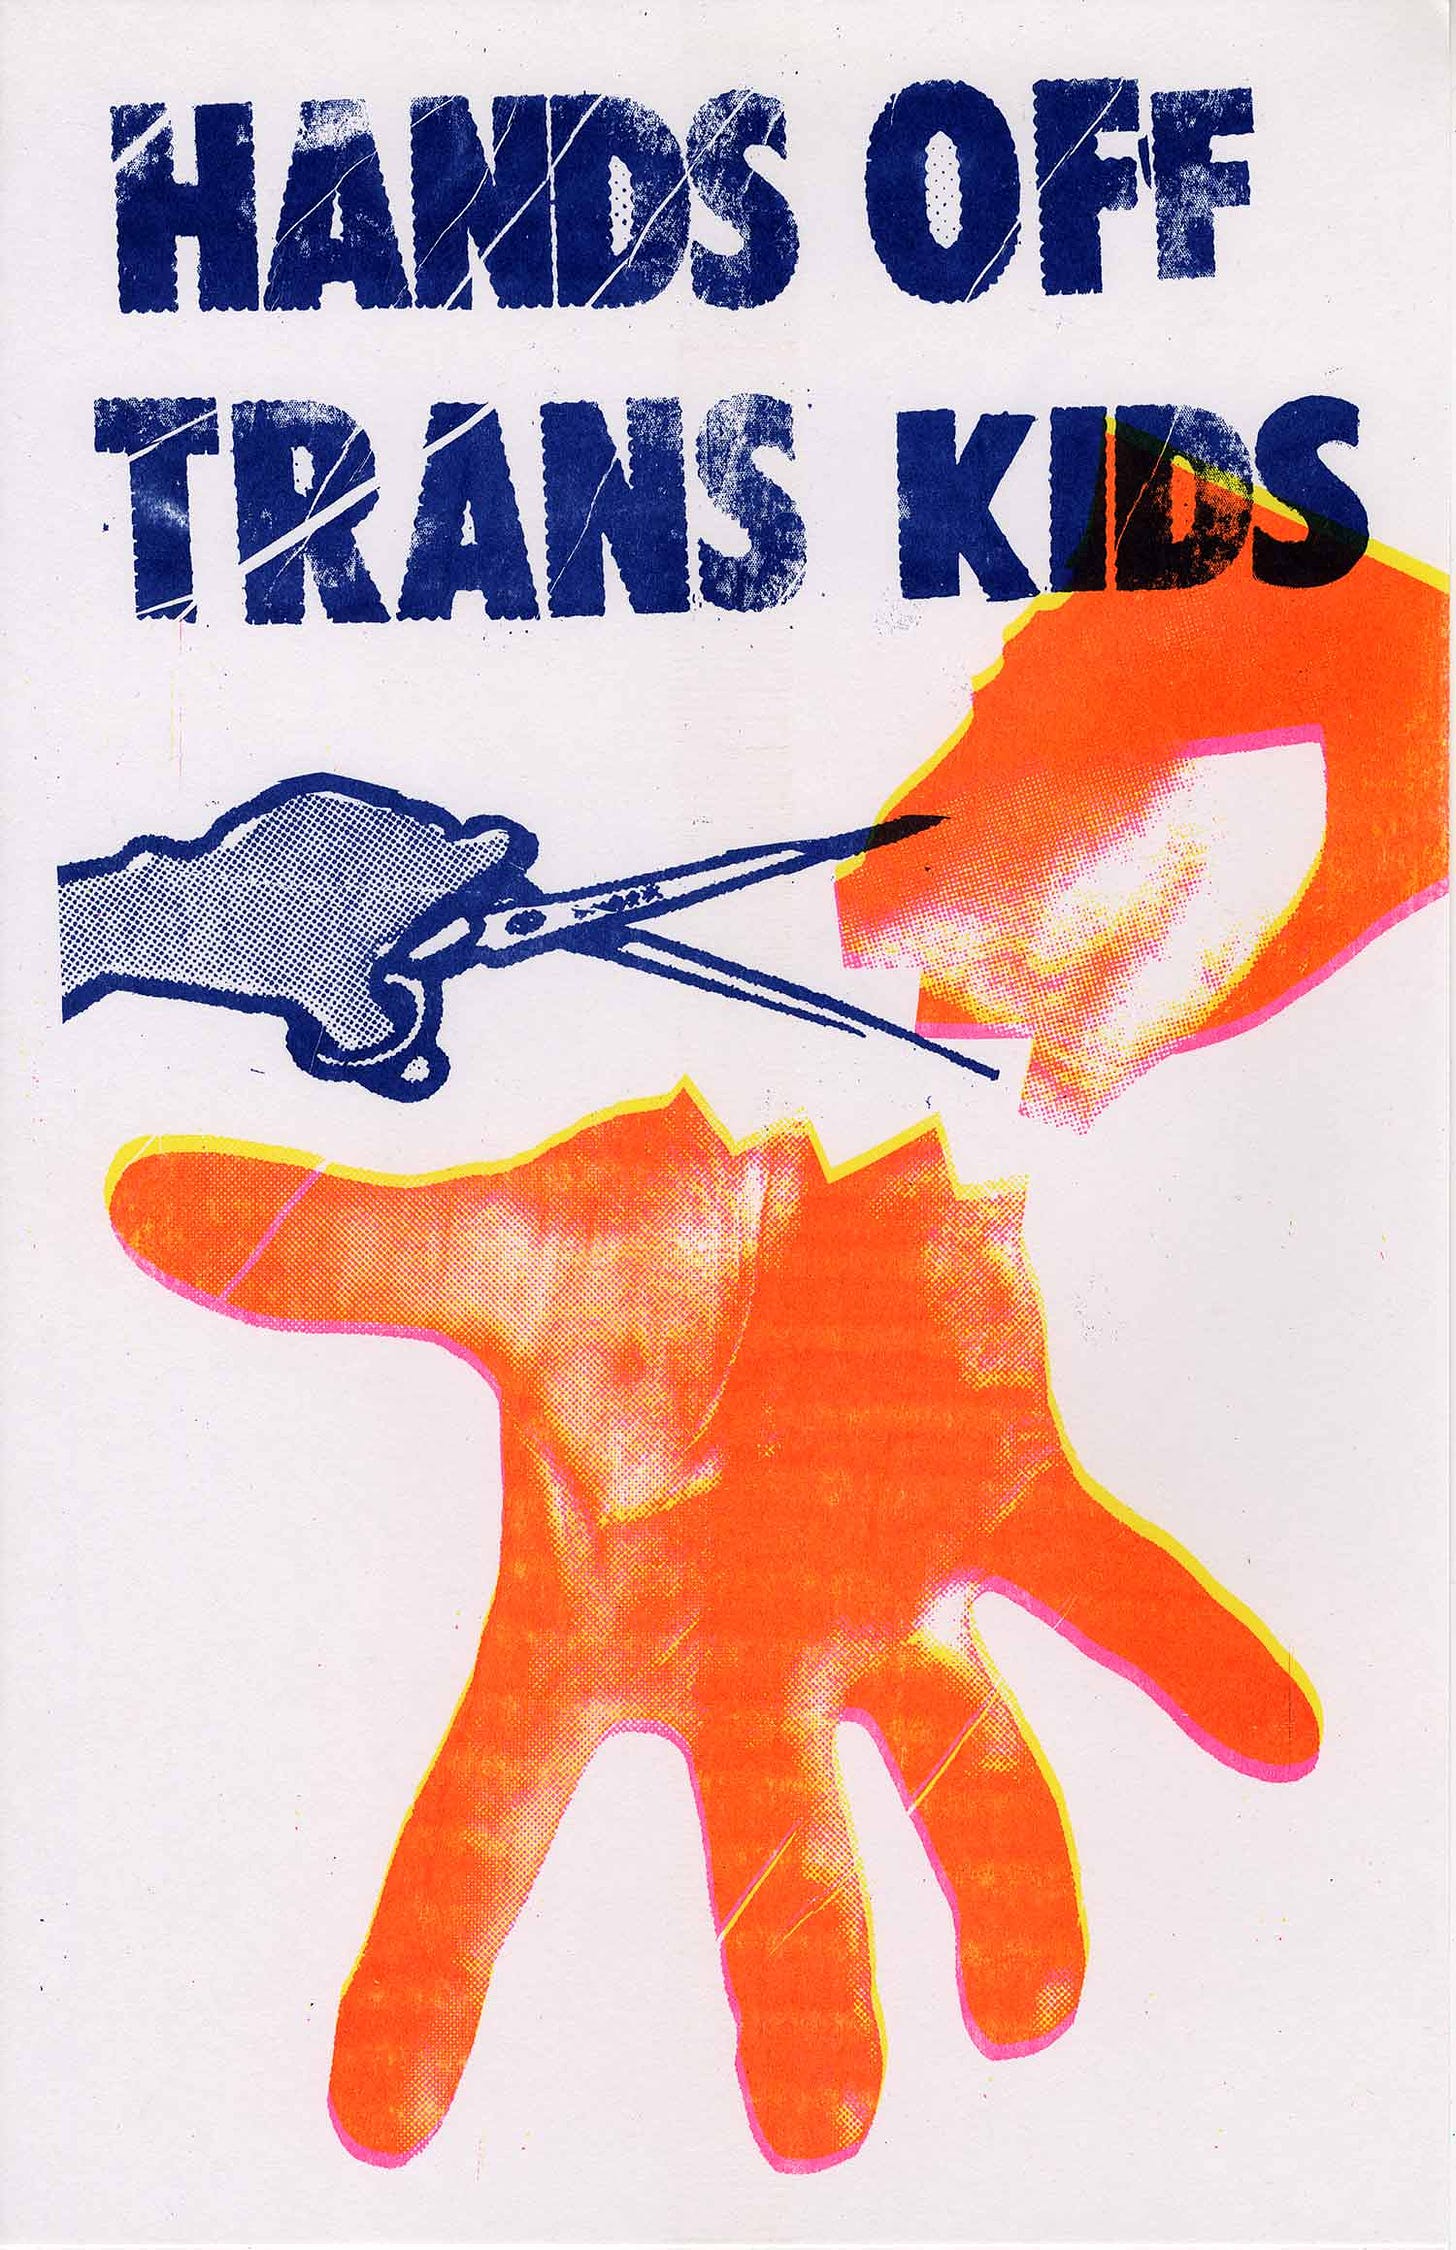 Text reads "Hands off trans kids" a small blue hand cuts an orange hand off a wrist with scissors